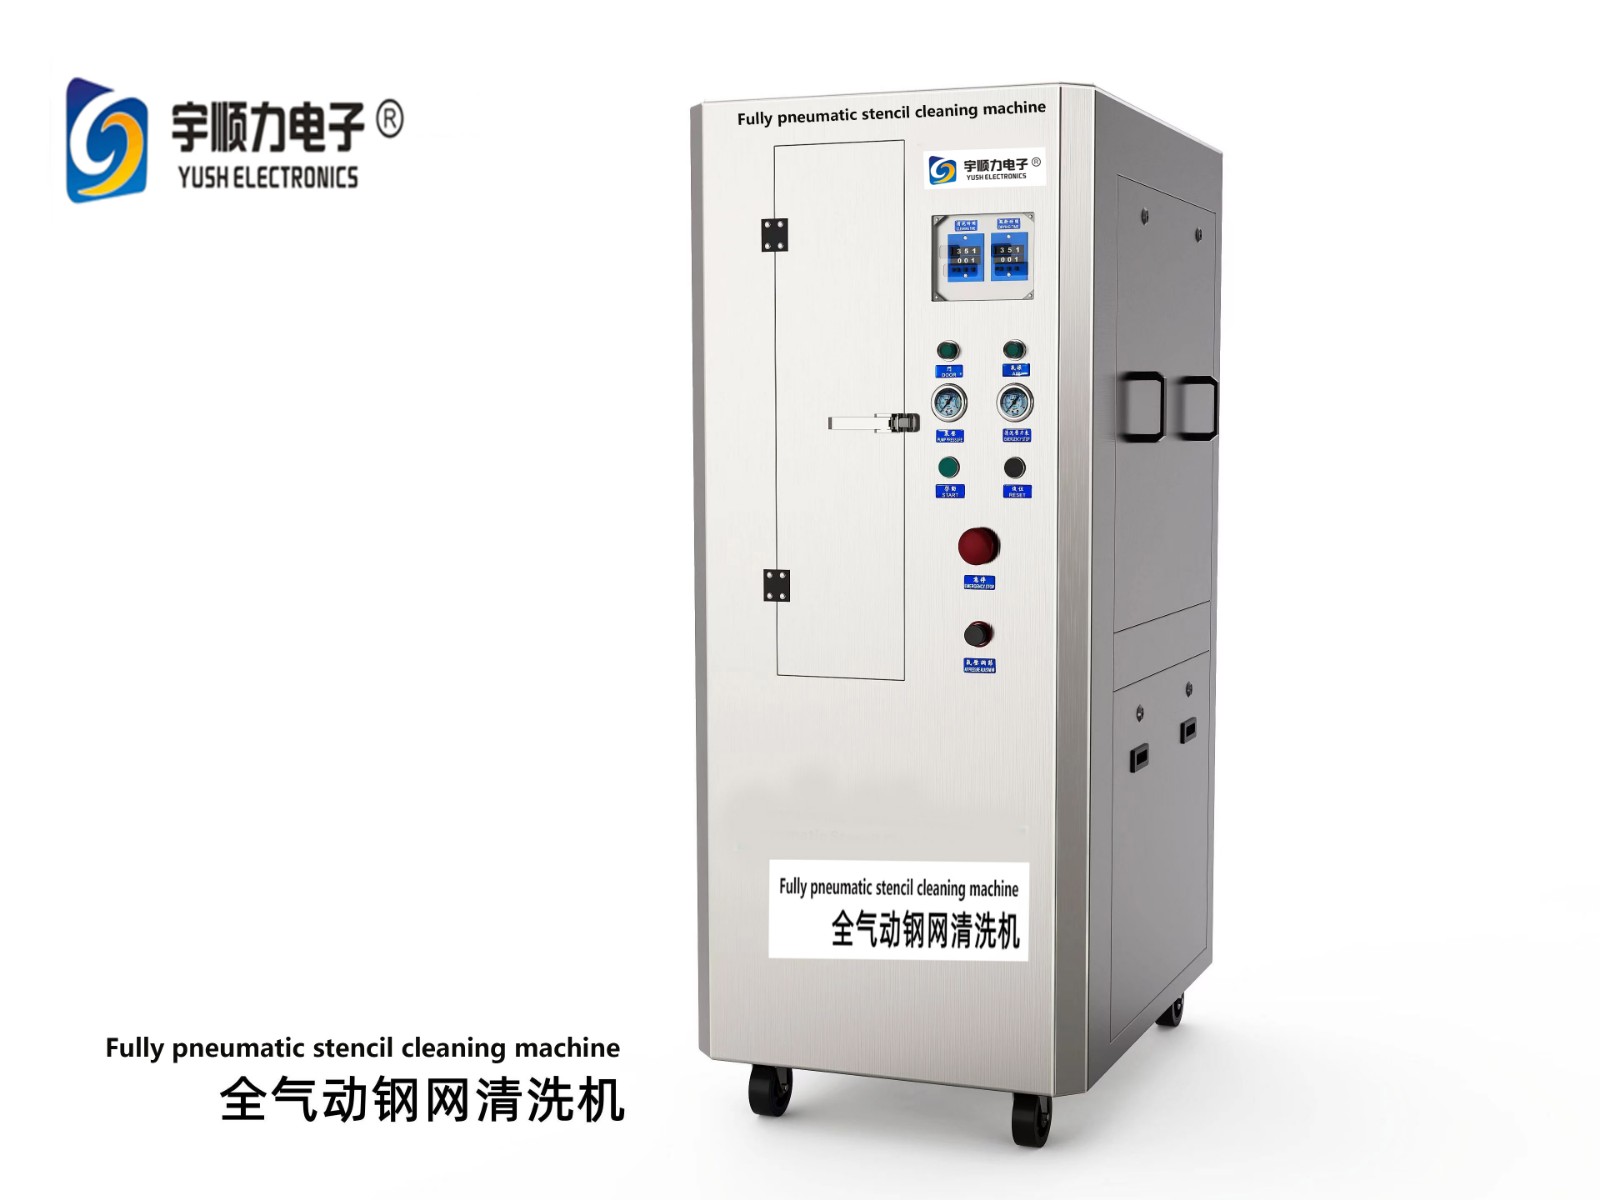 Stencil Cleaning Machine-Stencil Cleaning Machine Manufacturers, Suppliers and Exporters on pcbcutting.com Industrial Ultrasonic Cleaner